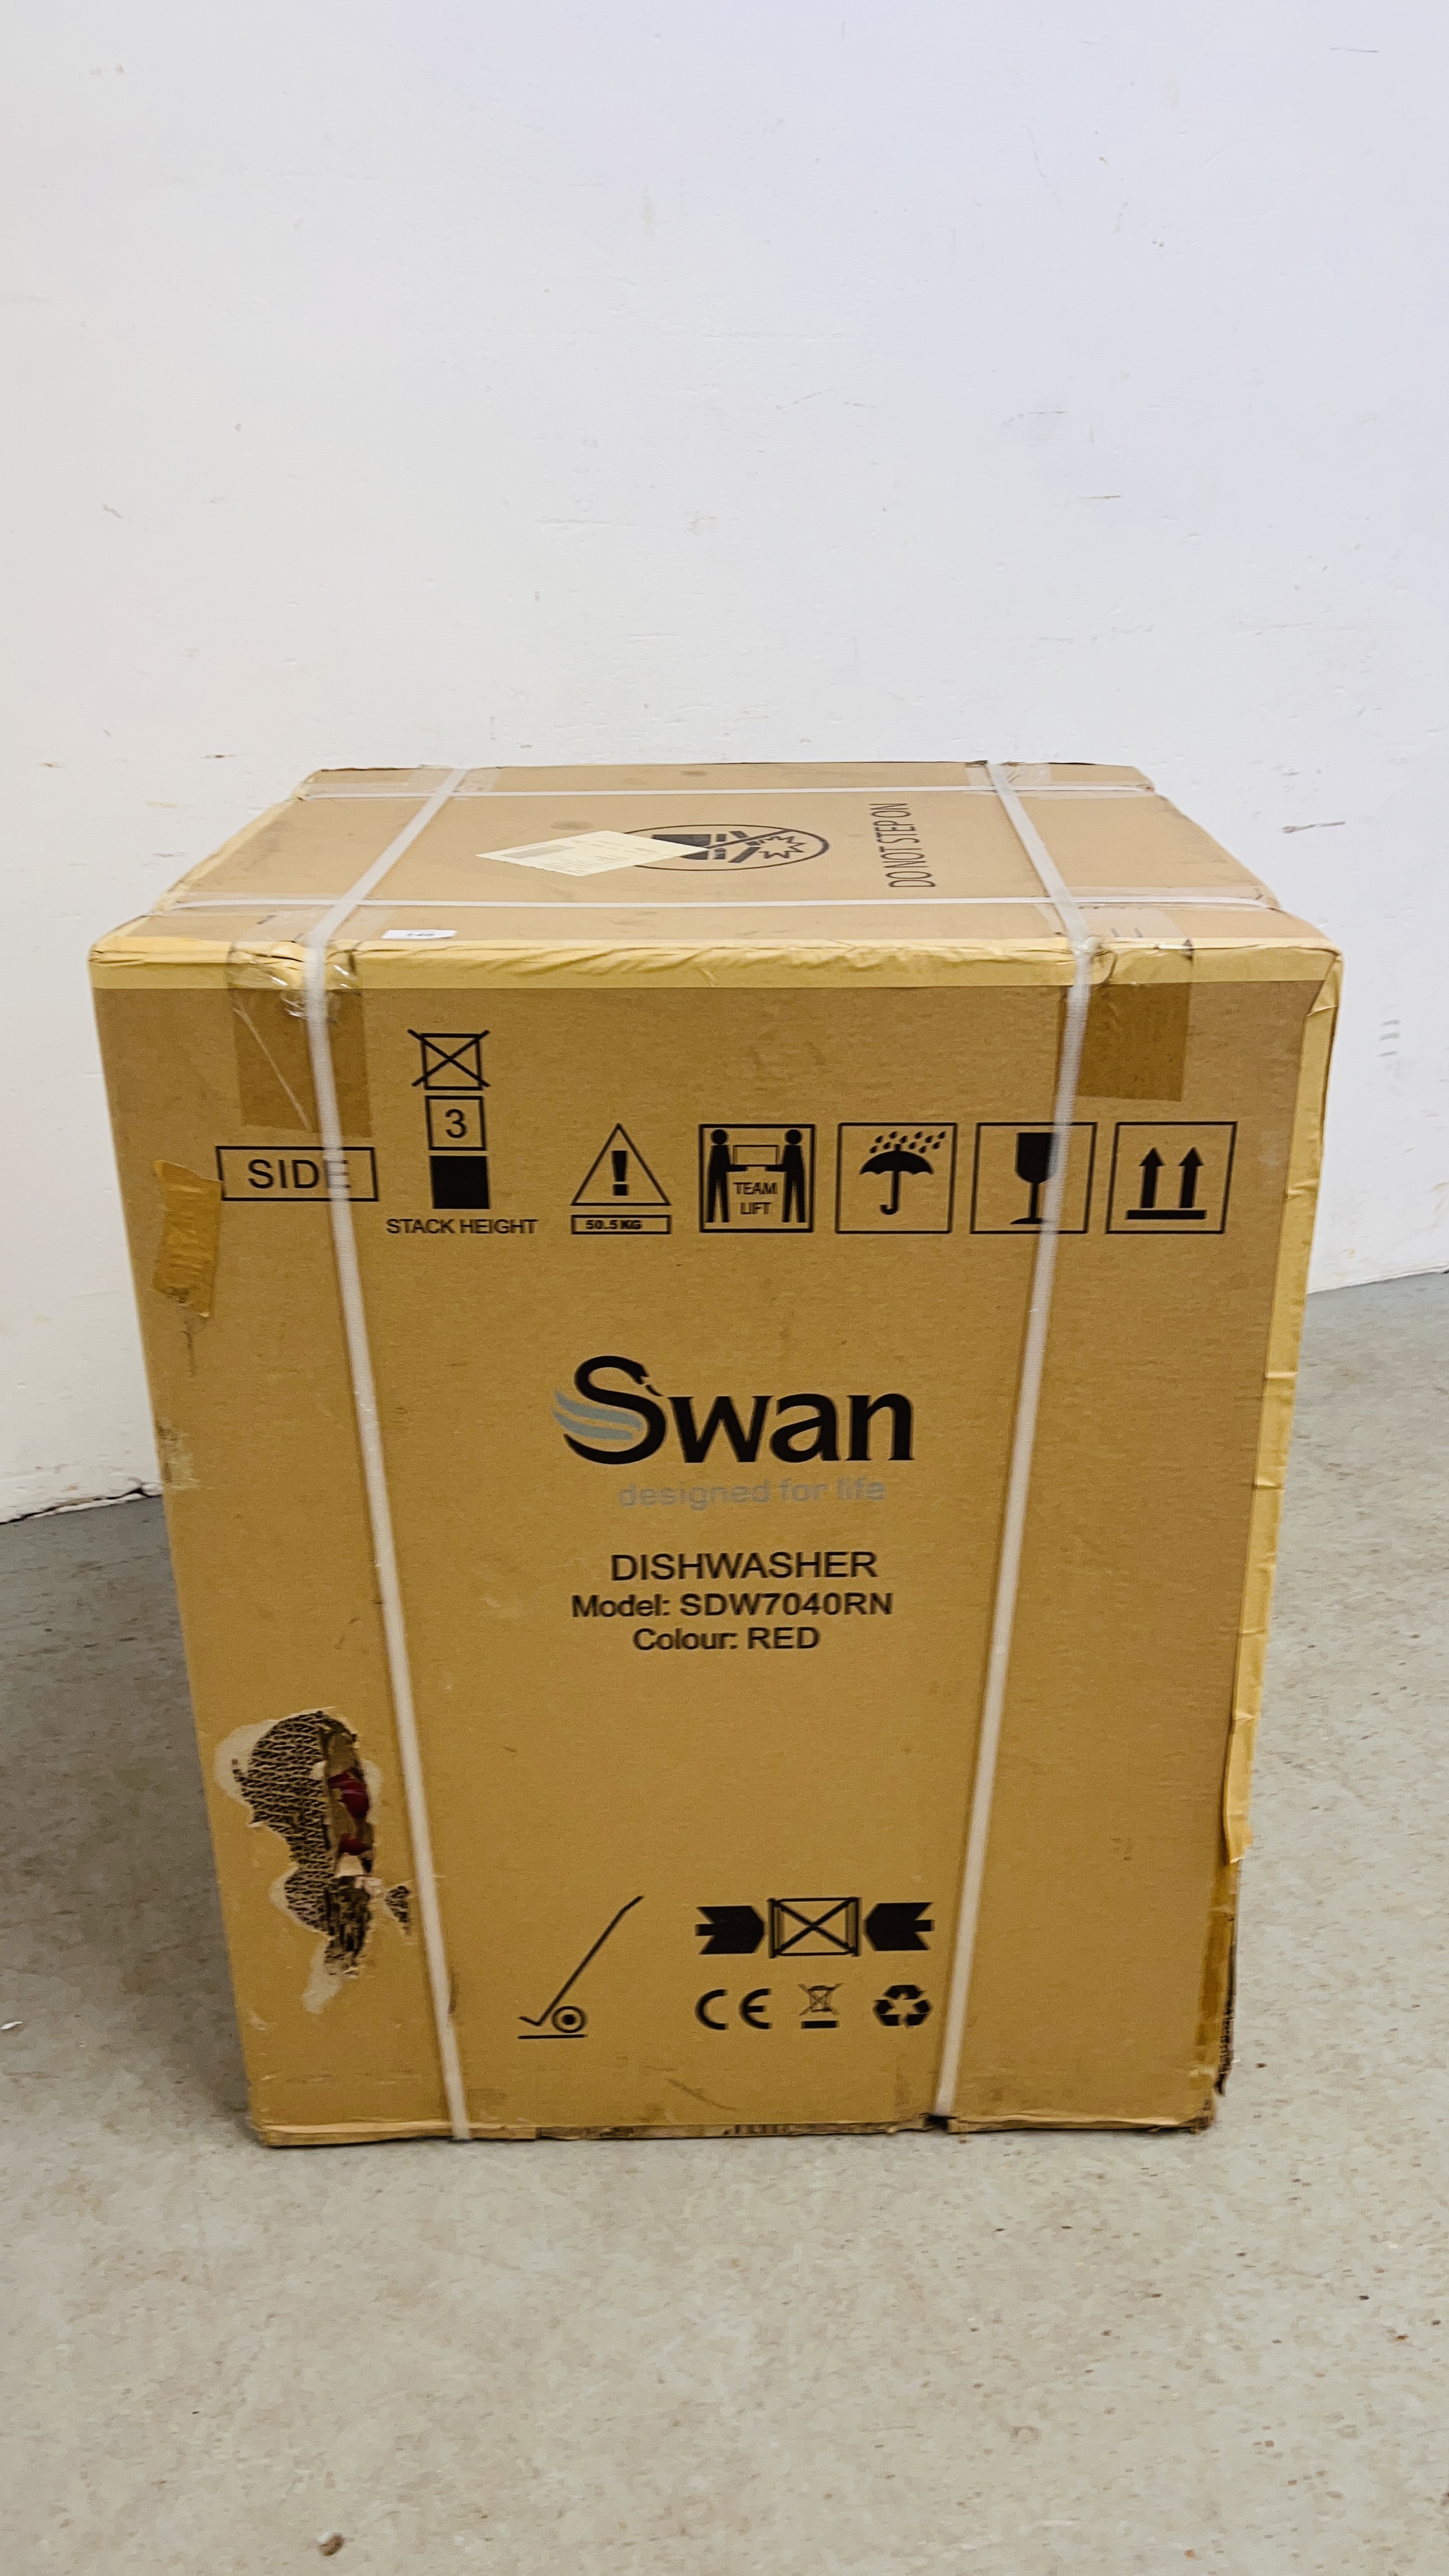 AN AS NEW RETRO STYLE SWAN DISHWASHER MODEL SDW7040RN COLOUR - RED, - Image 3 of 6